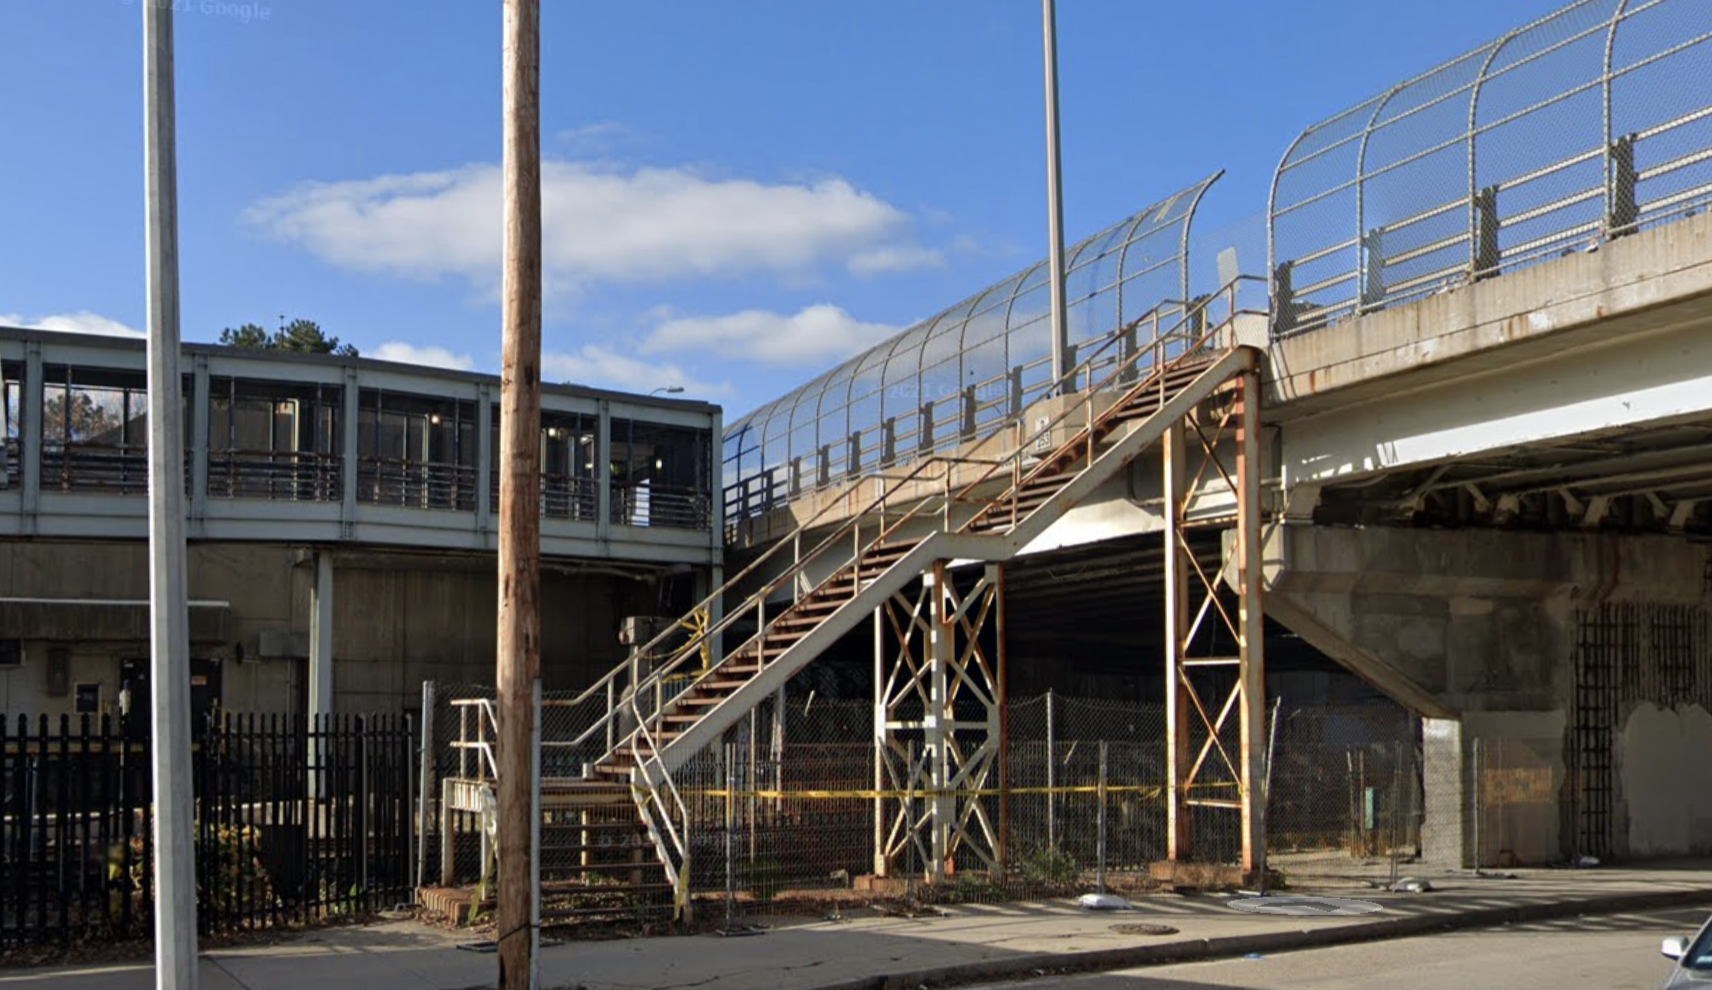 A crumbling DCR-owned stairway leads to Columbia Road from the JFK/UMass station